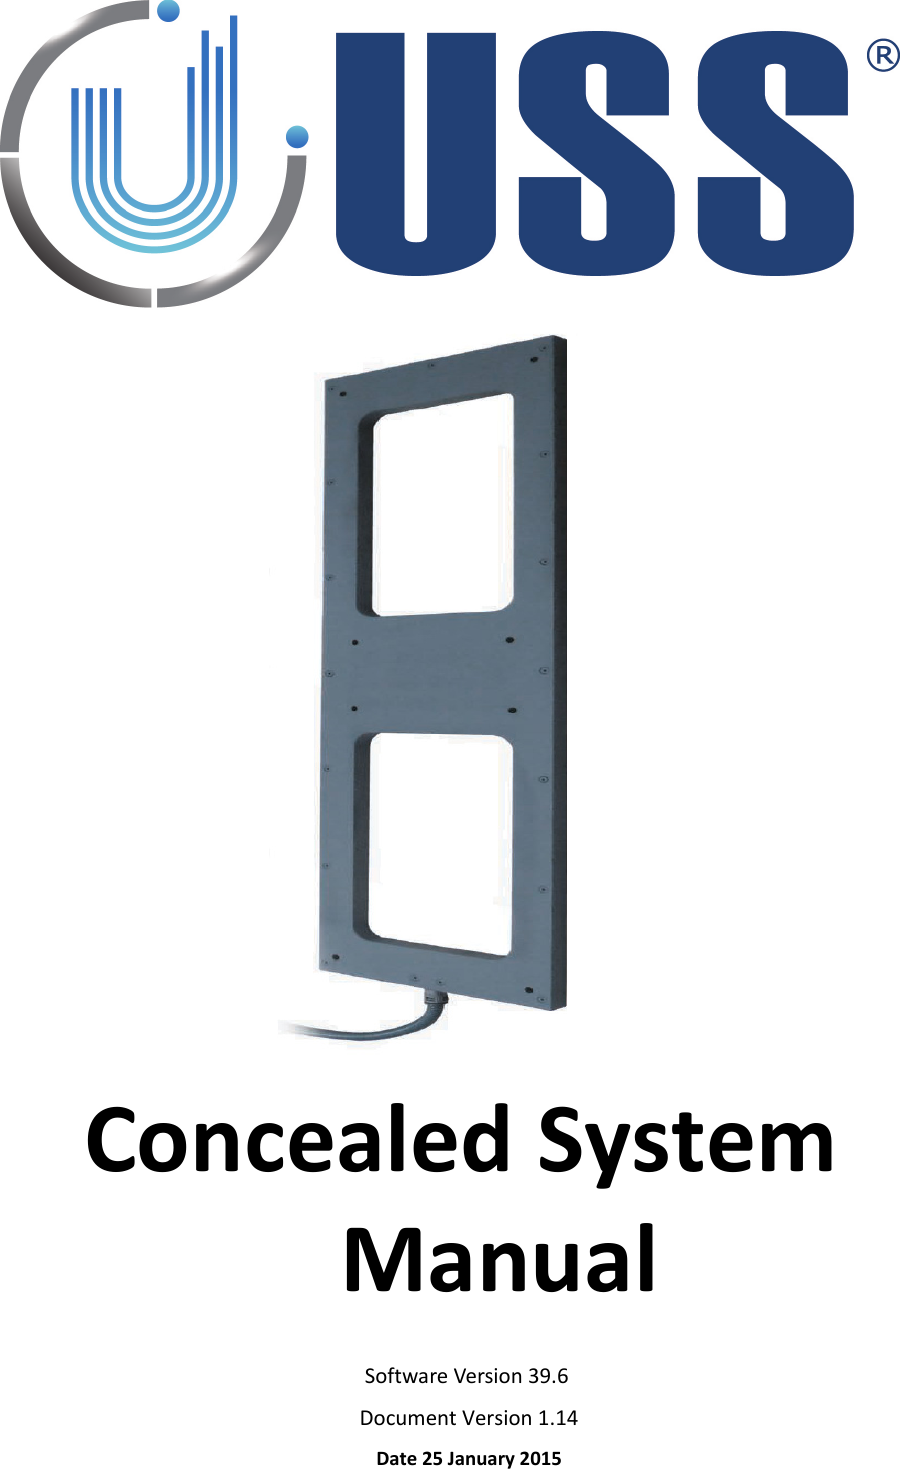     Concealed System ManualSoftware Version 39.6 Document Version 1.14 Date 25 January 2015